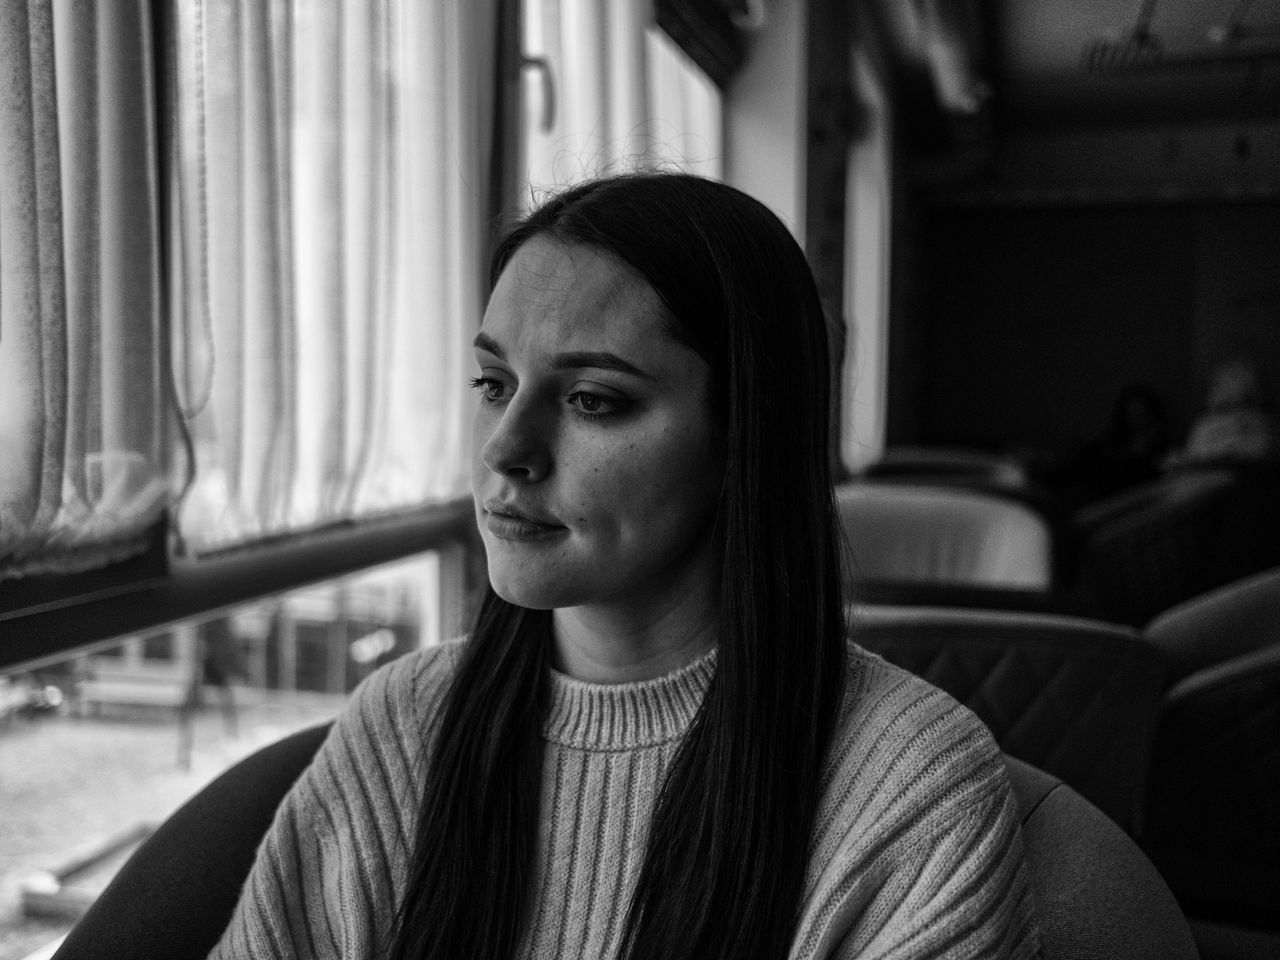 Maryna fled Kyiv with her family early on in the Russian invasion of Ukraine.